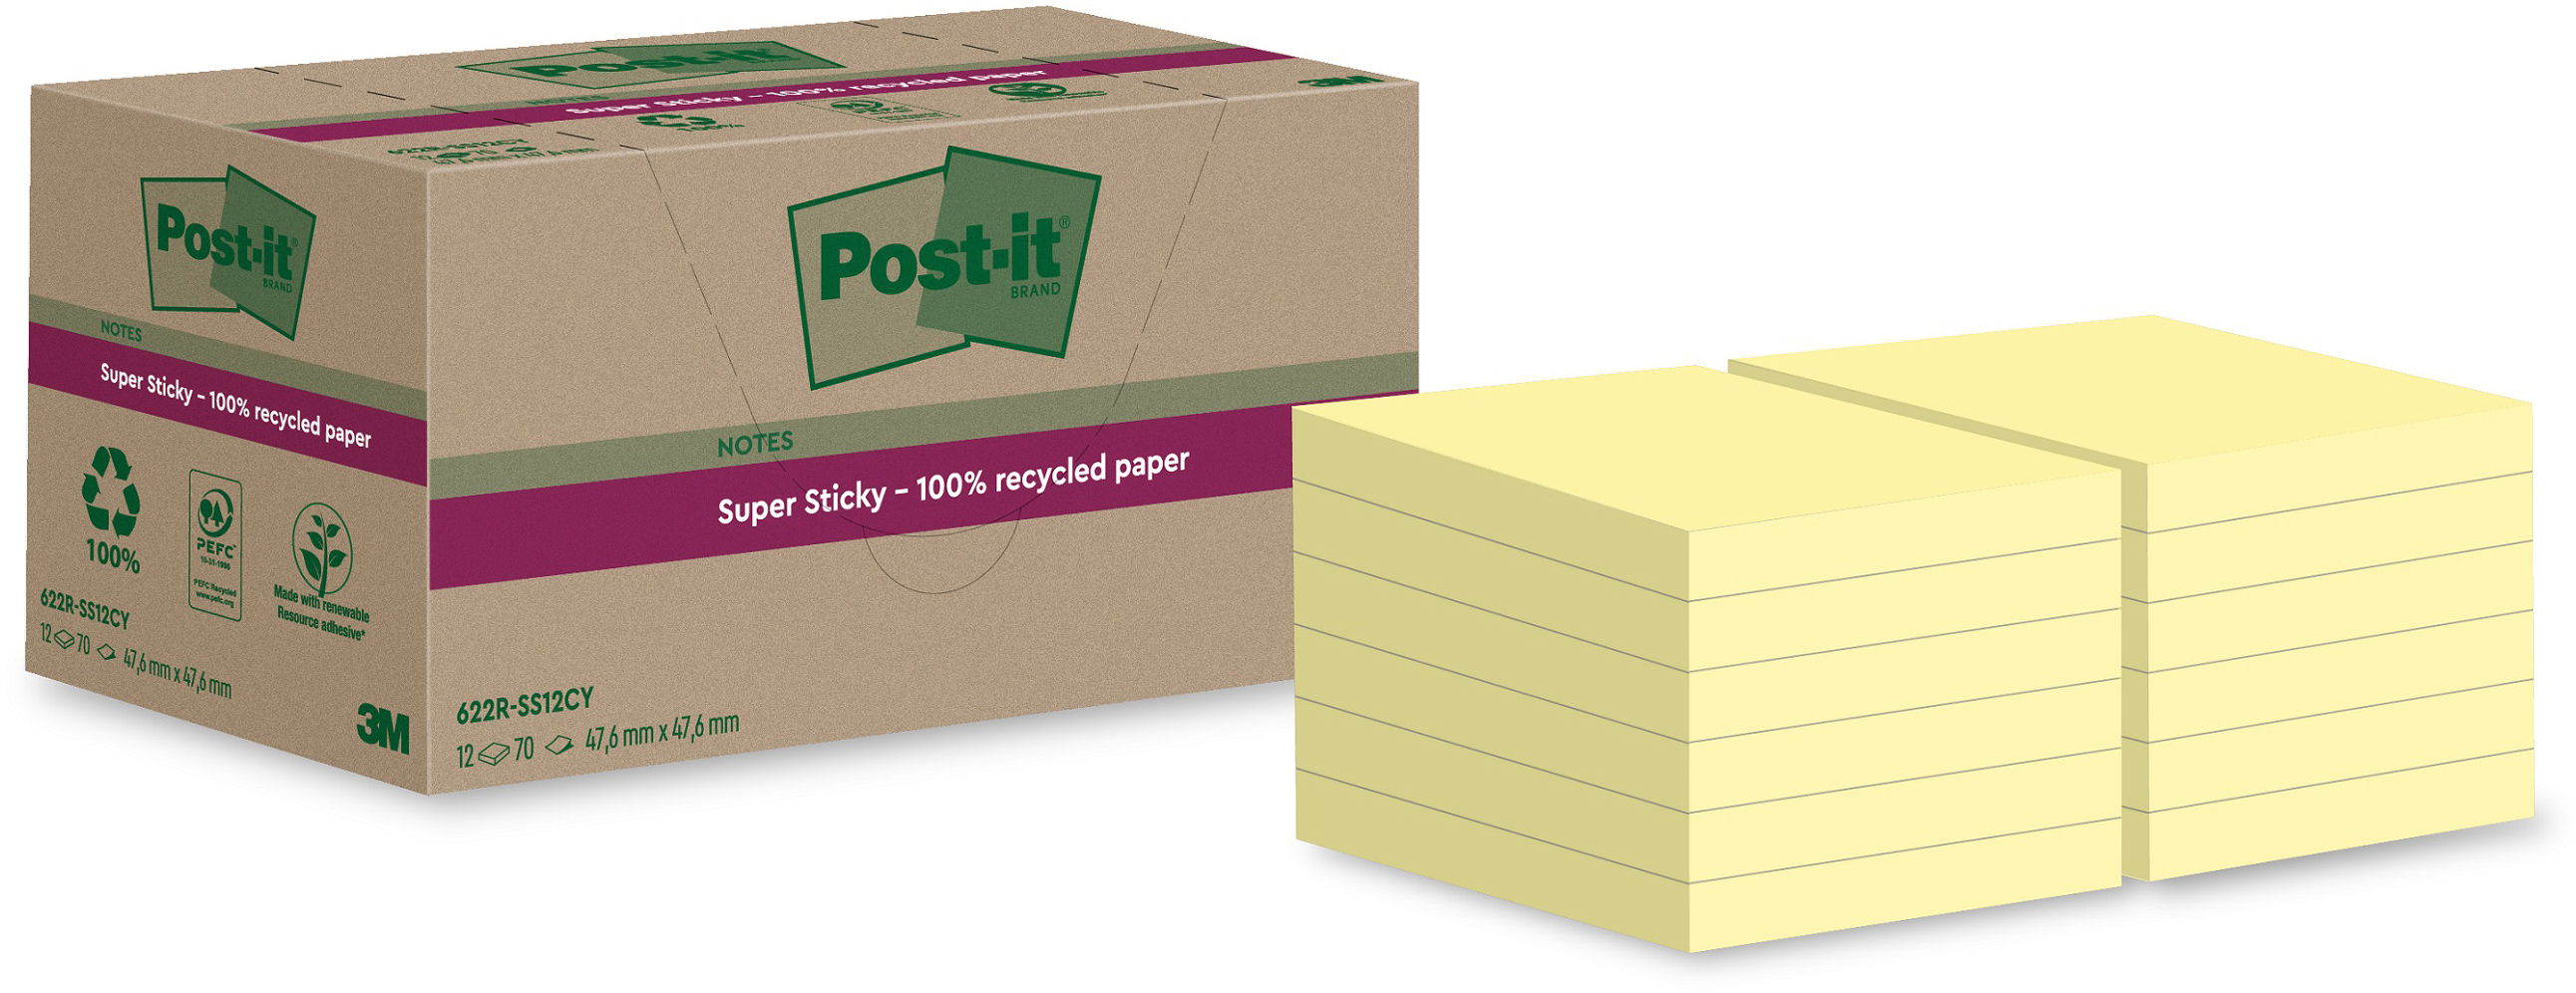 POST-IT SuperSticky Notes 47.6x47.6mm 622 RSS12CY Recycling,jaune 12x70 flls.